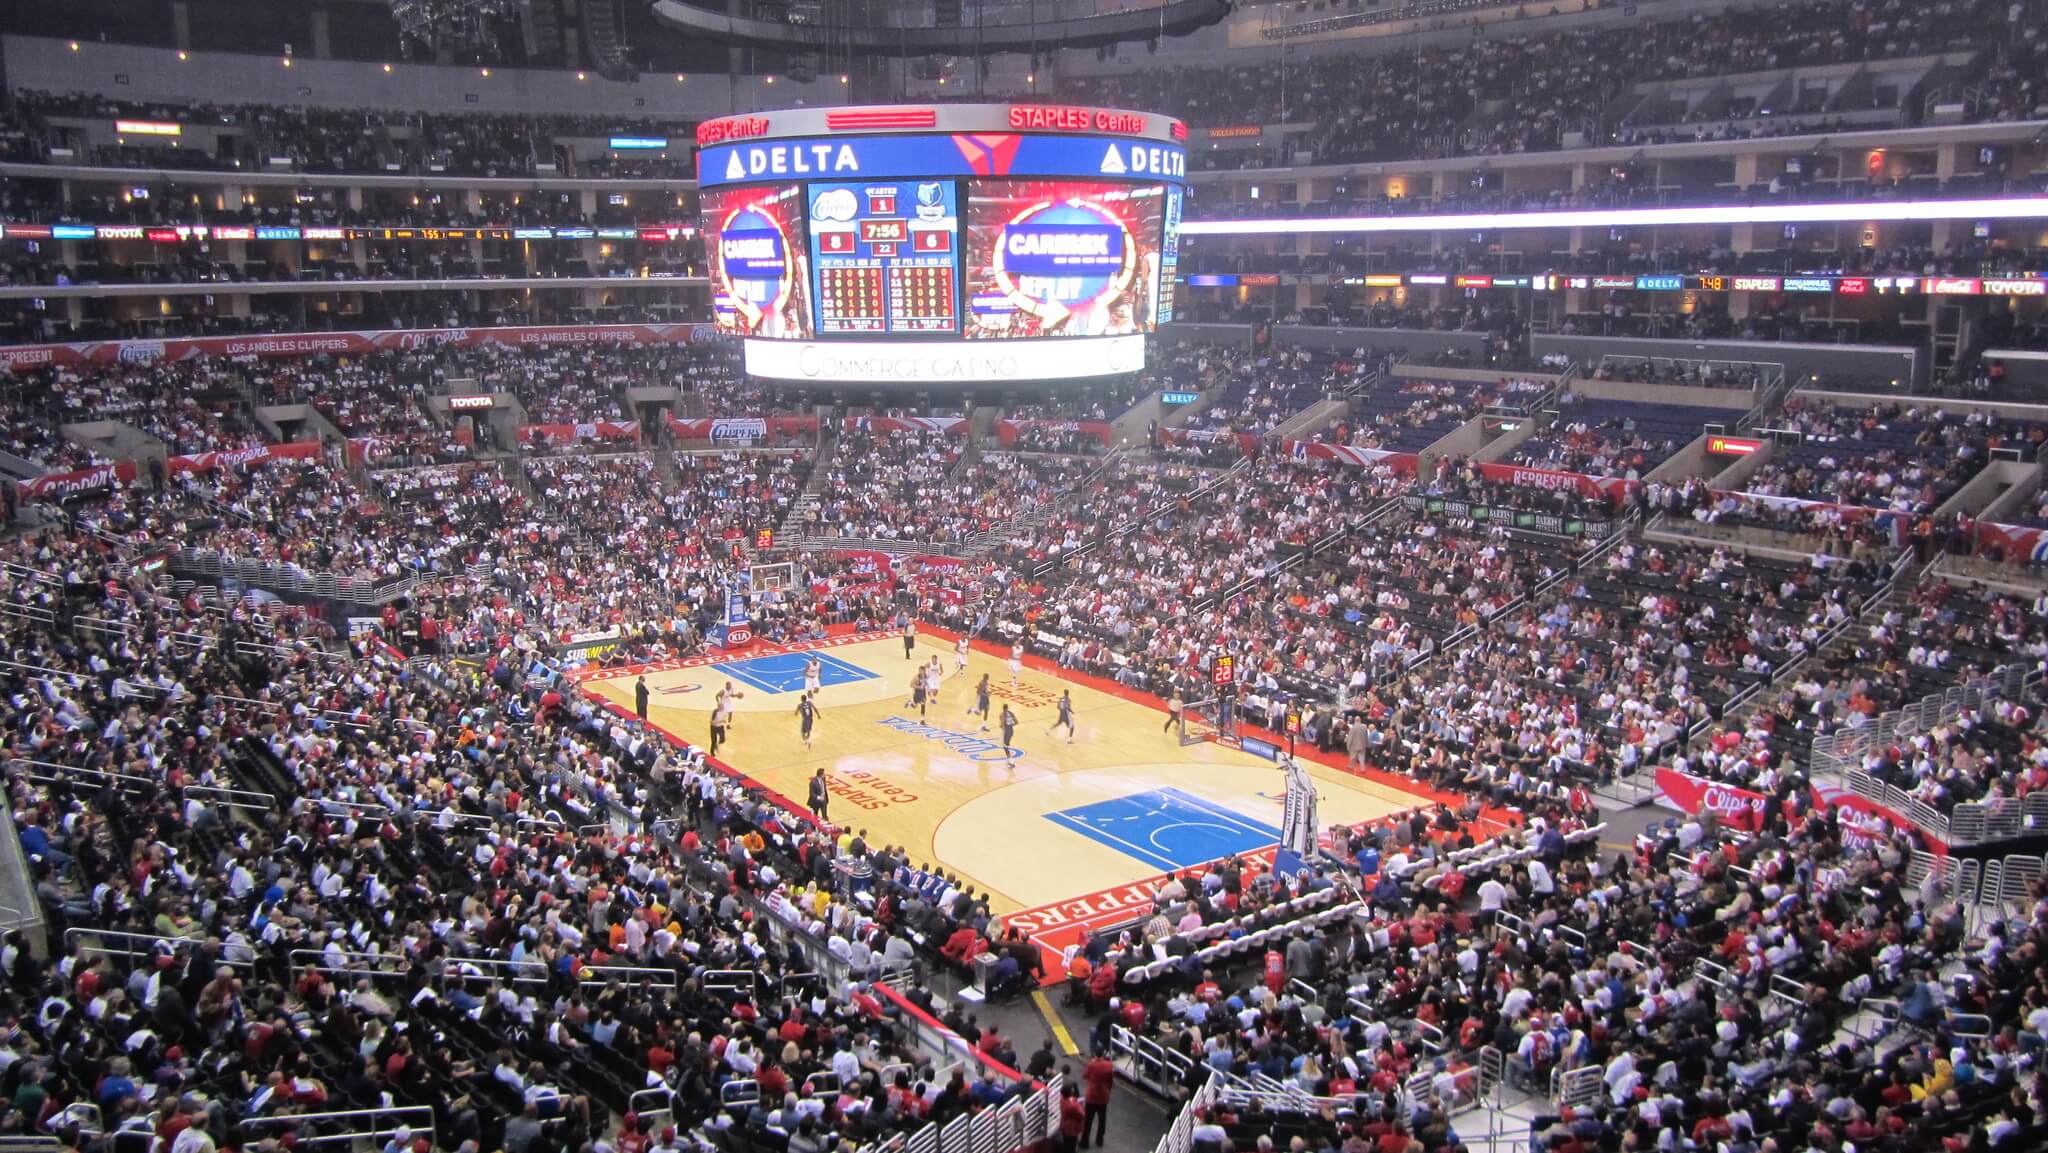 LA Clippers at Staples Center